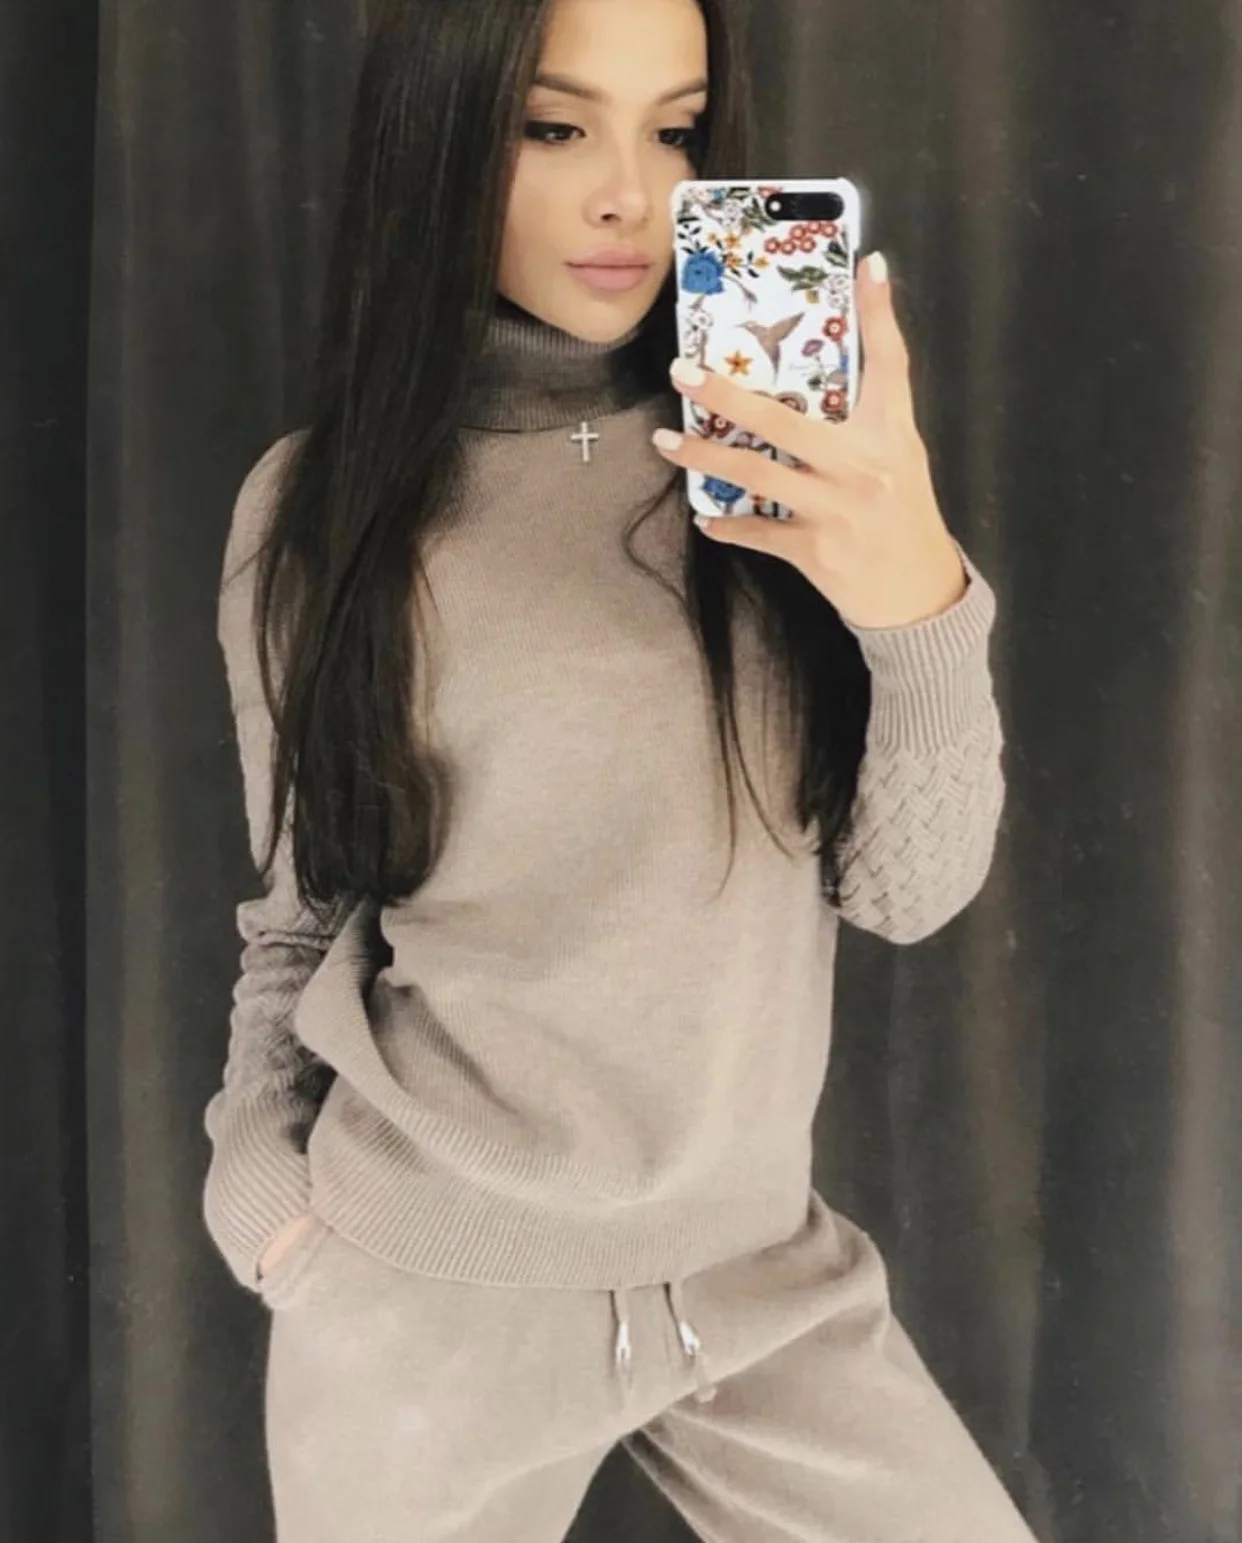 Autumn Winter Casual Knitted Tracksuit Turtleneck Pullover Sports Sweatshirts Women 2 Piece Set Knit Pants+Jumper Suit Clothing